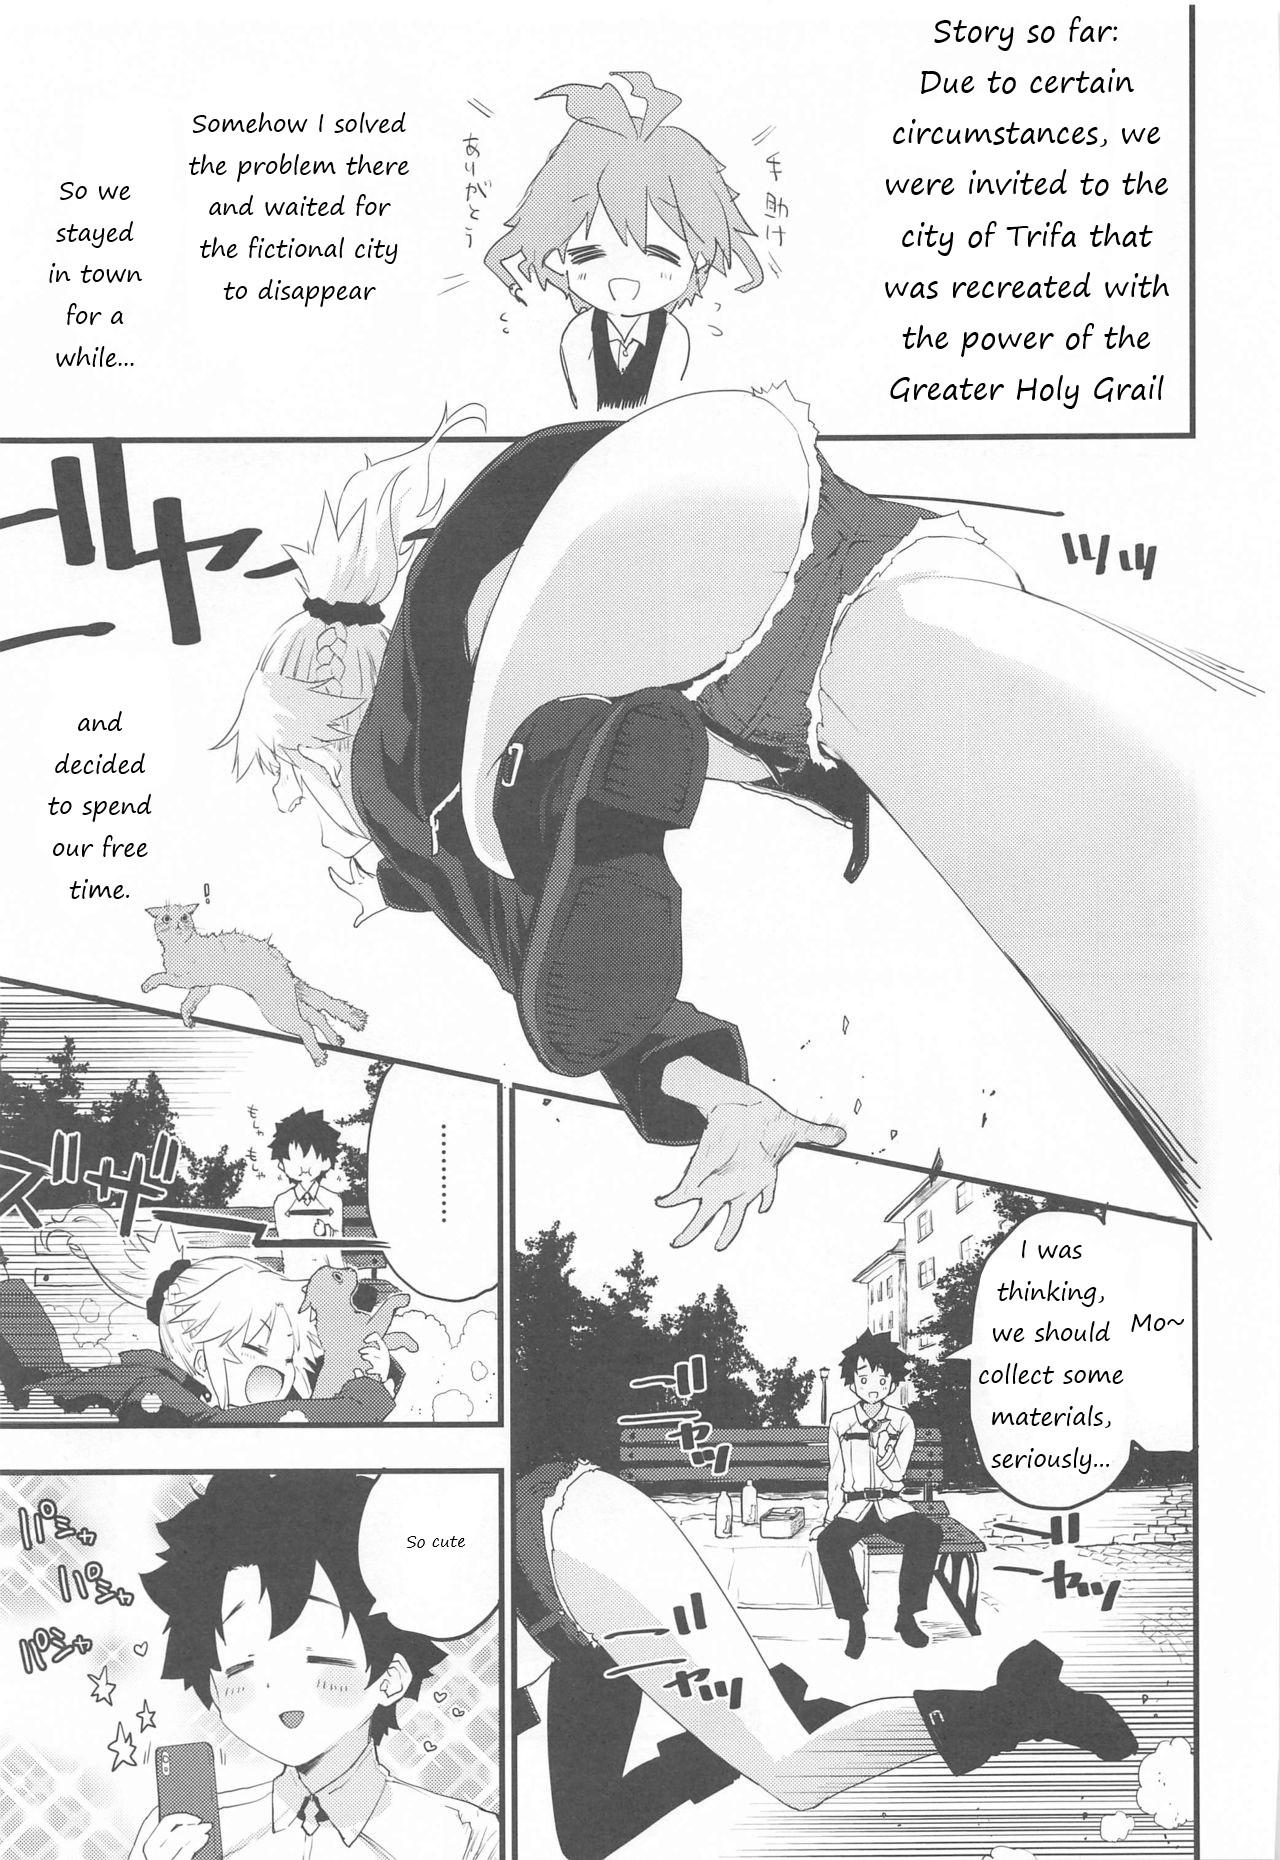 Butthole Memory of Honey Night - Fate grand order Webcams - Page 2